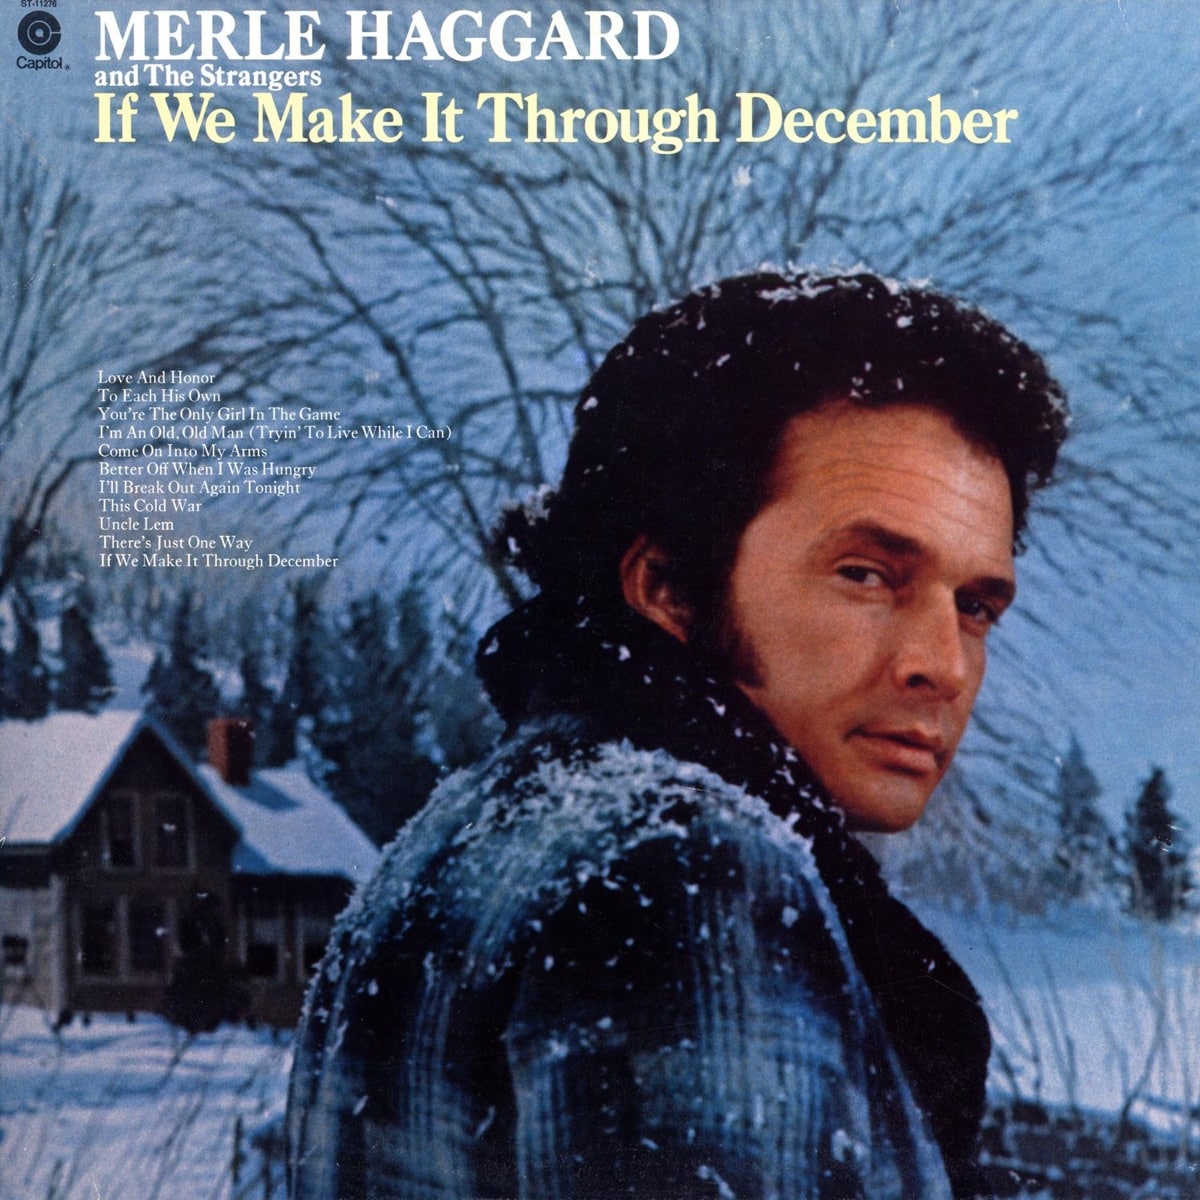 Cover art for the Merle Haggard album If We Make It Through December